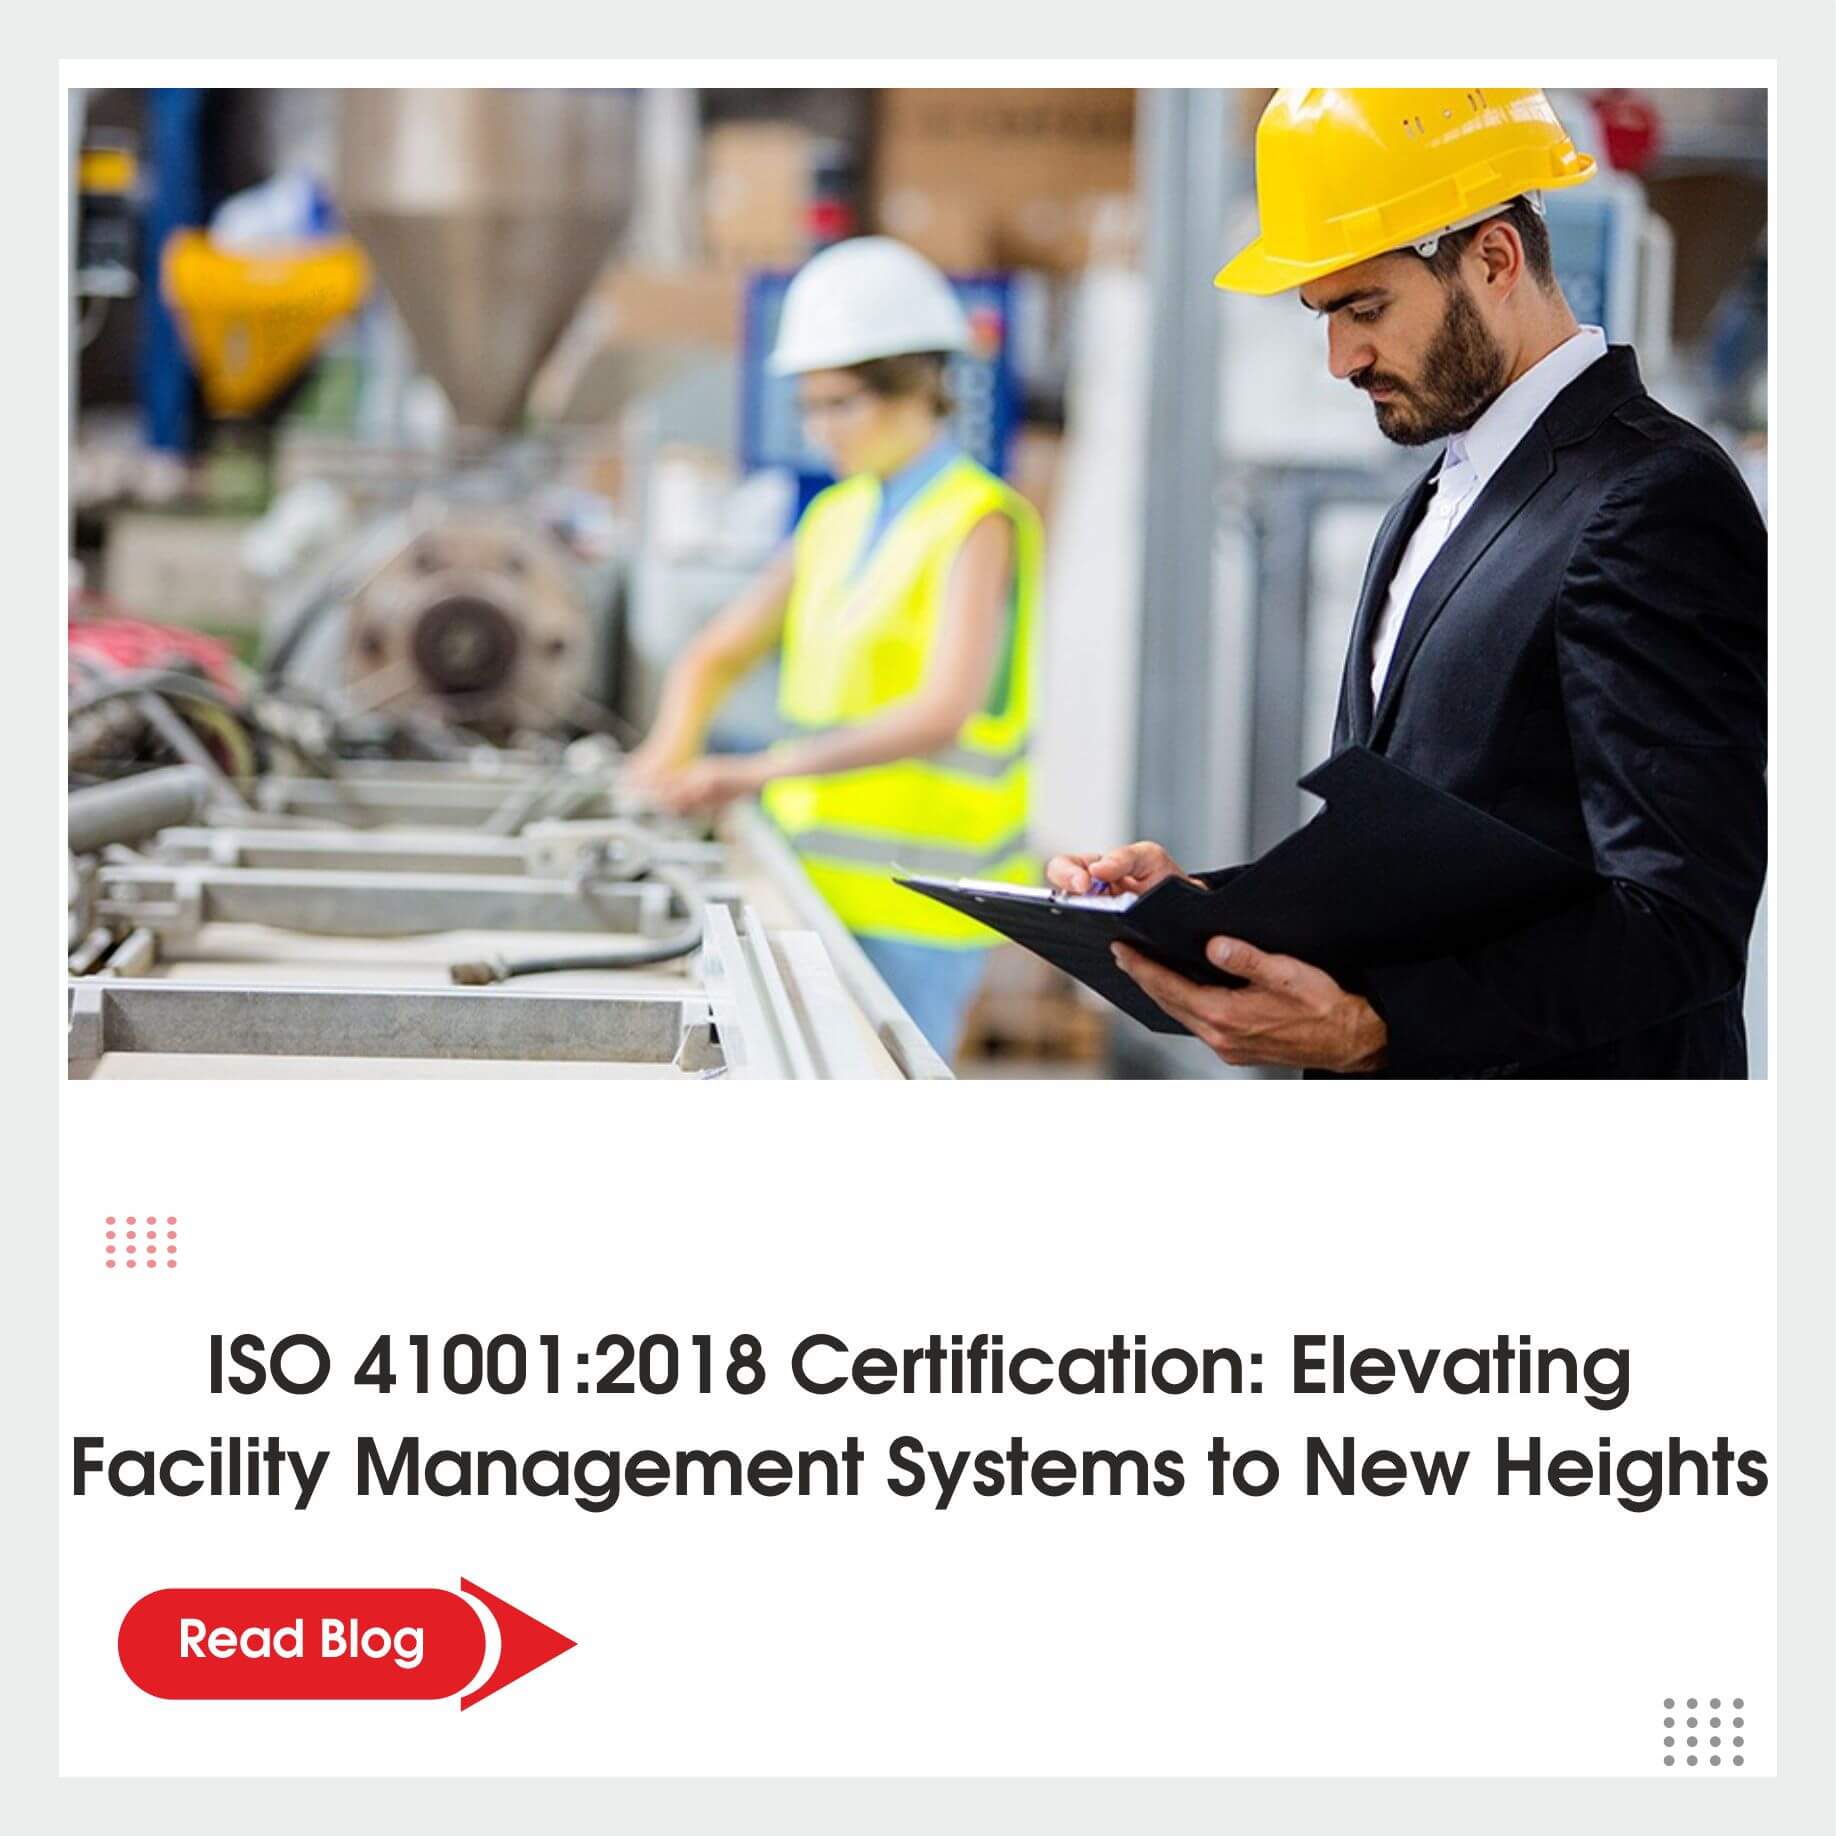 ISO-410012018-Certification-Elevating-Facility-Management-Systems-to-New-Heights